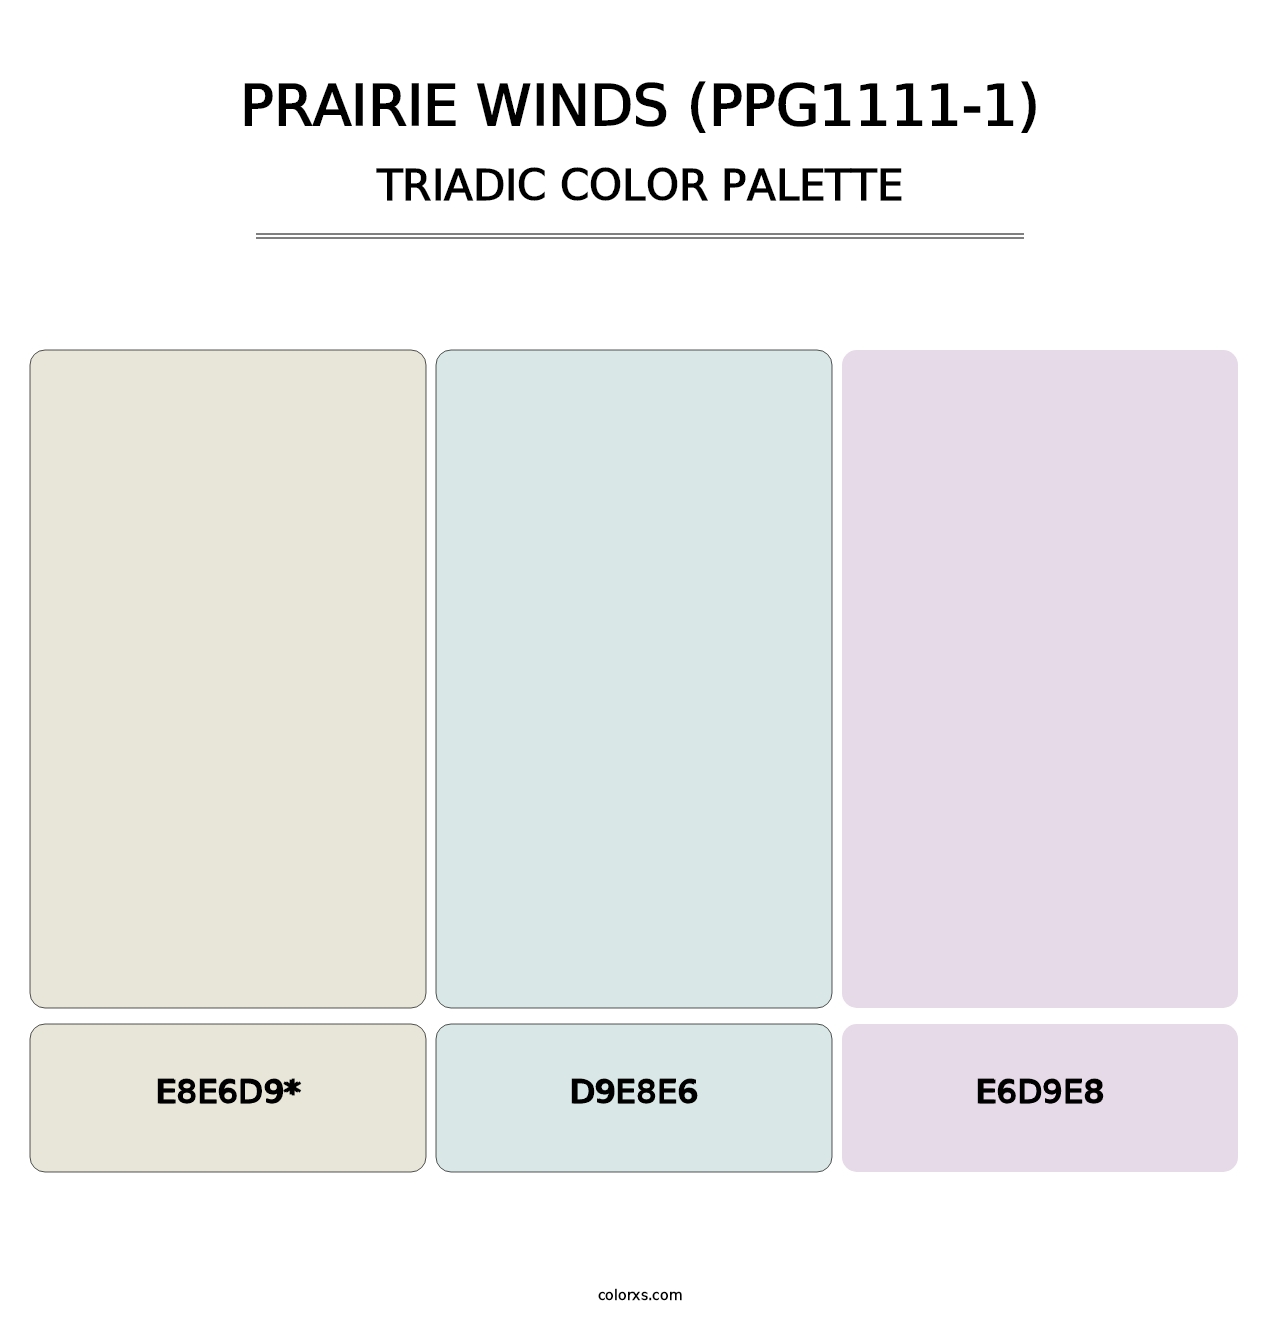 Prairie Winds (PPG1111-1) - Triadic Color Palette